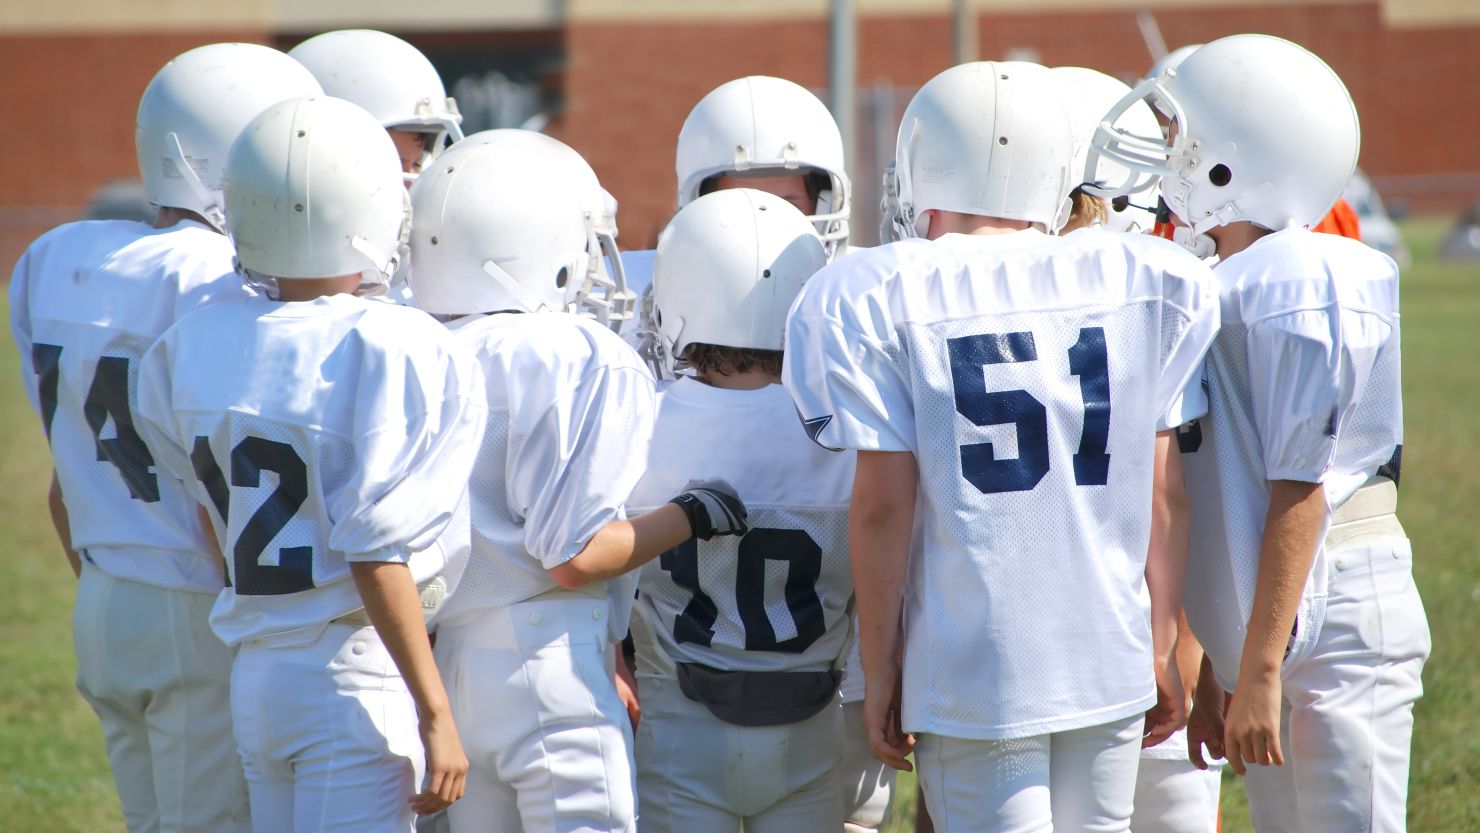 The rate of kids' sports and recreation-related emergency room visits for traumatic brain injuries declined 32% from 2012 to 2018.